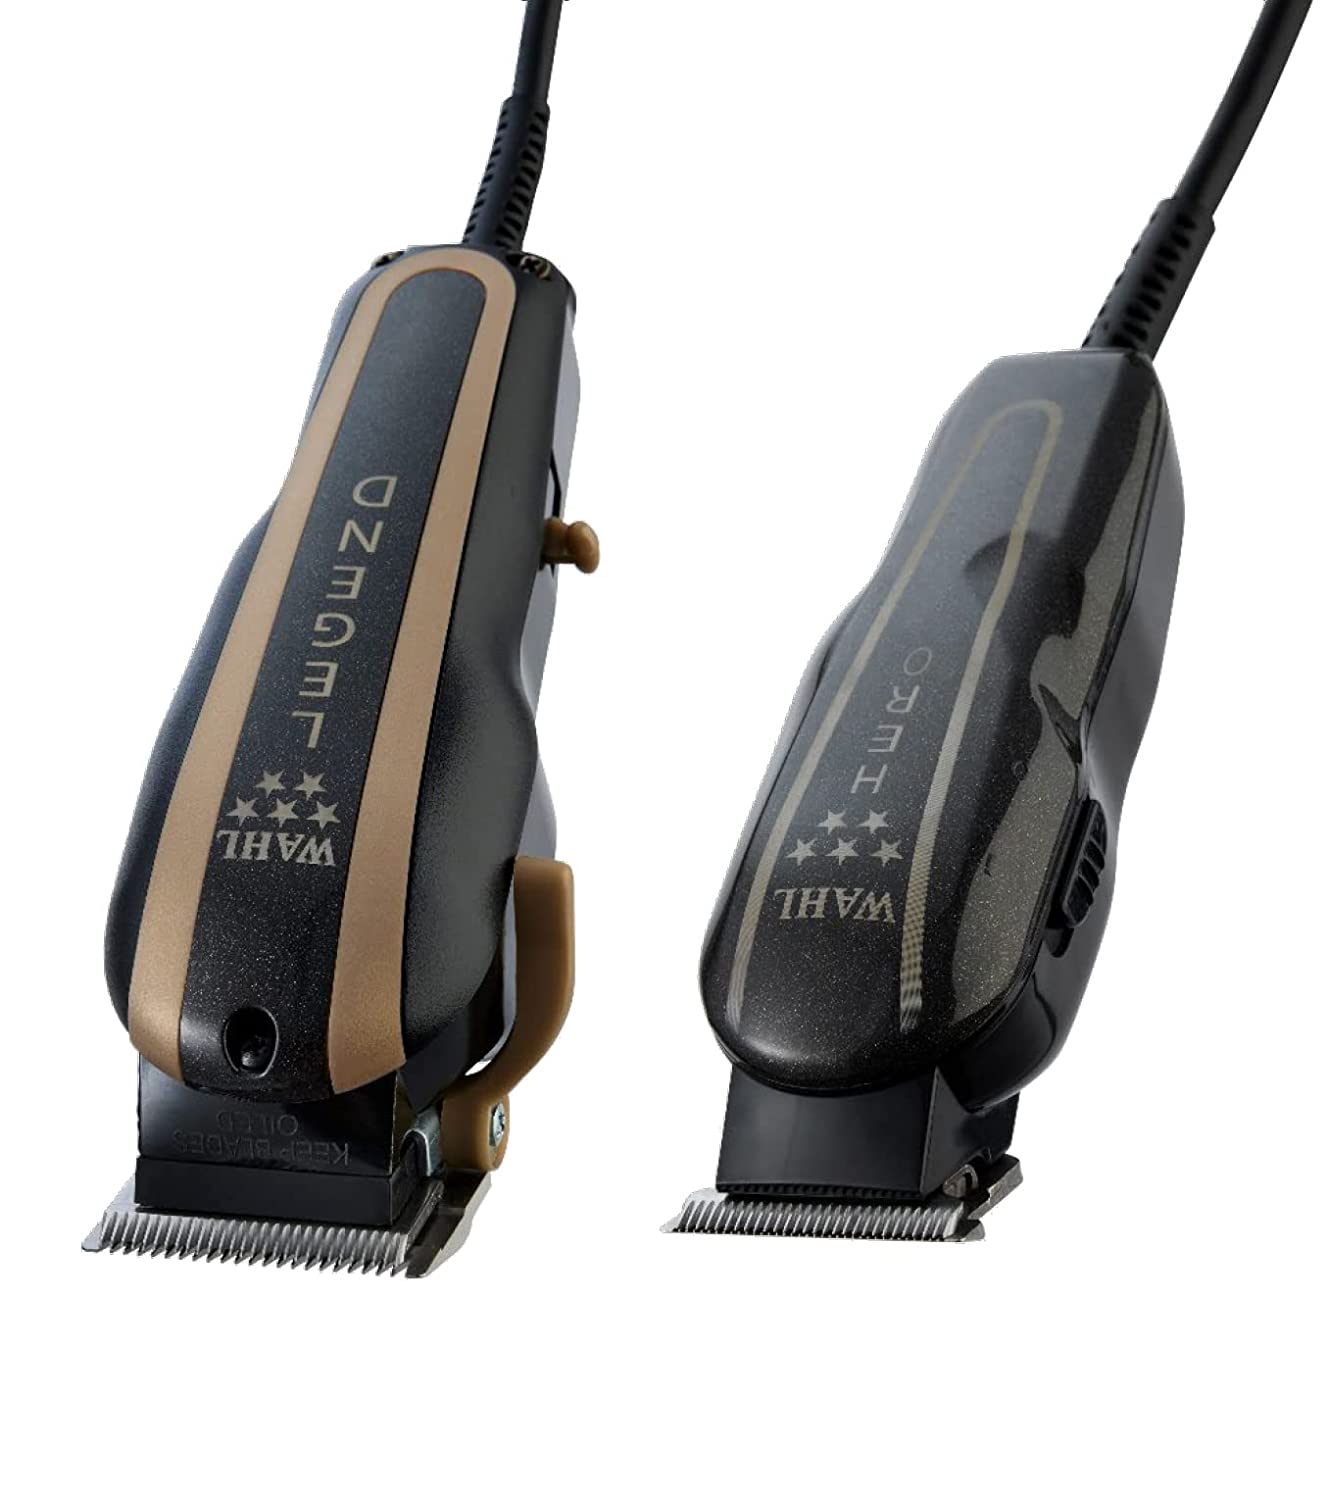 WAHL BARBER COMBO #8180